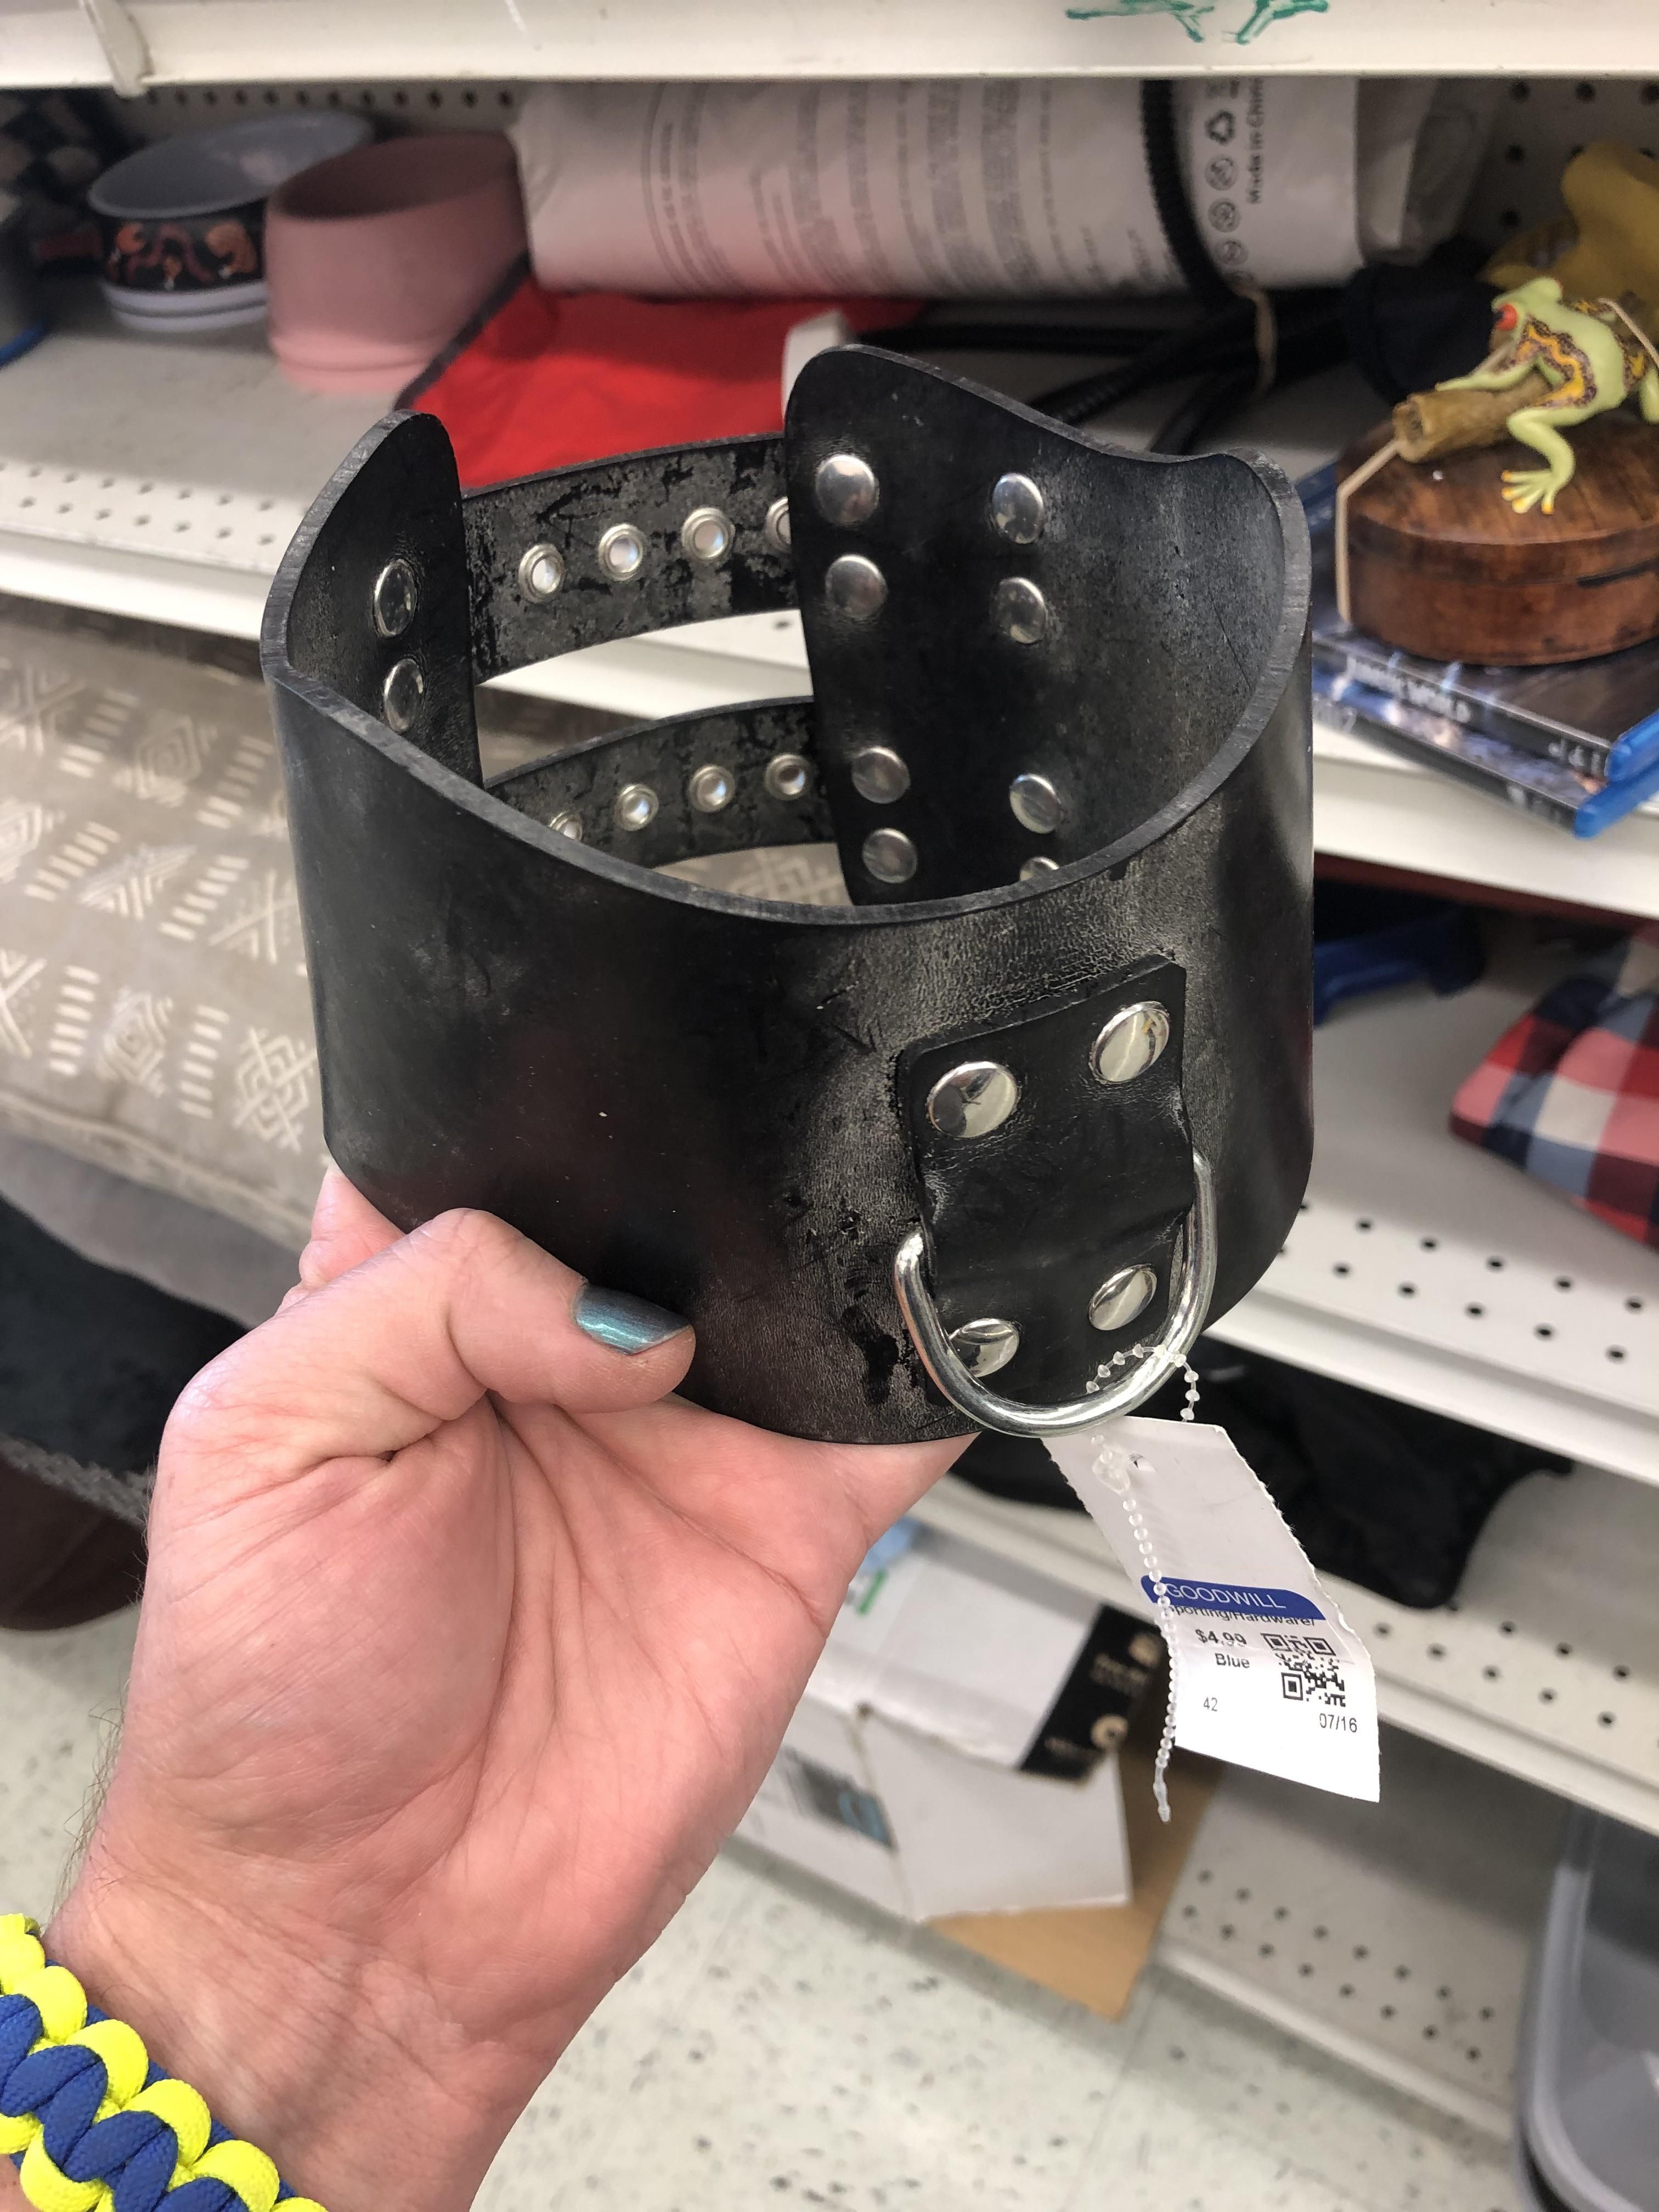 Found among the dog accessories at Goodwill…